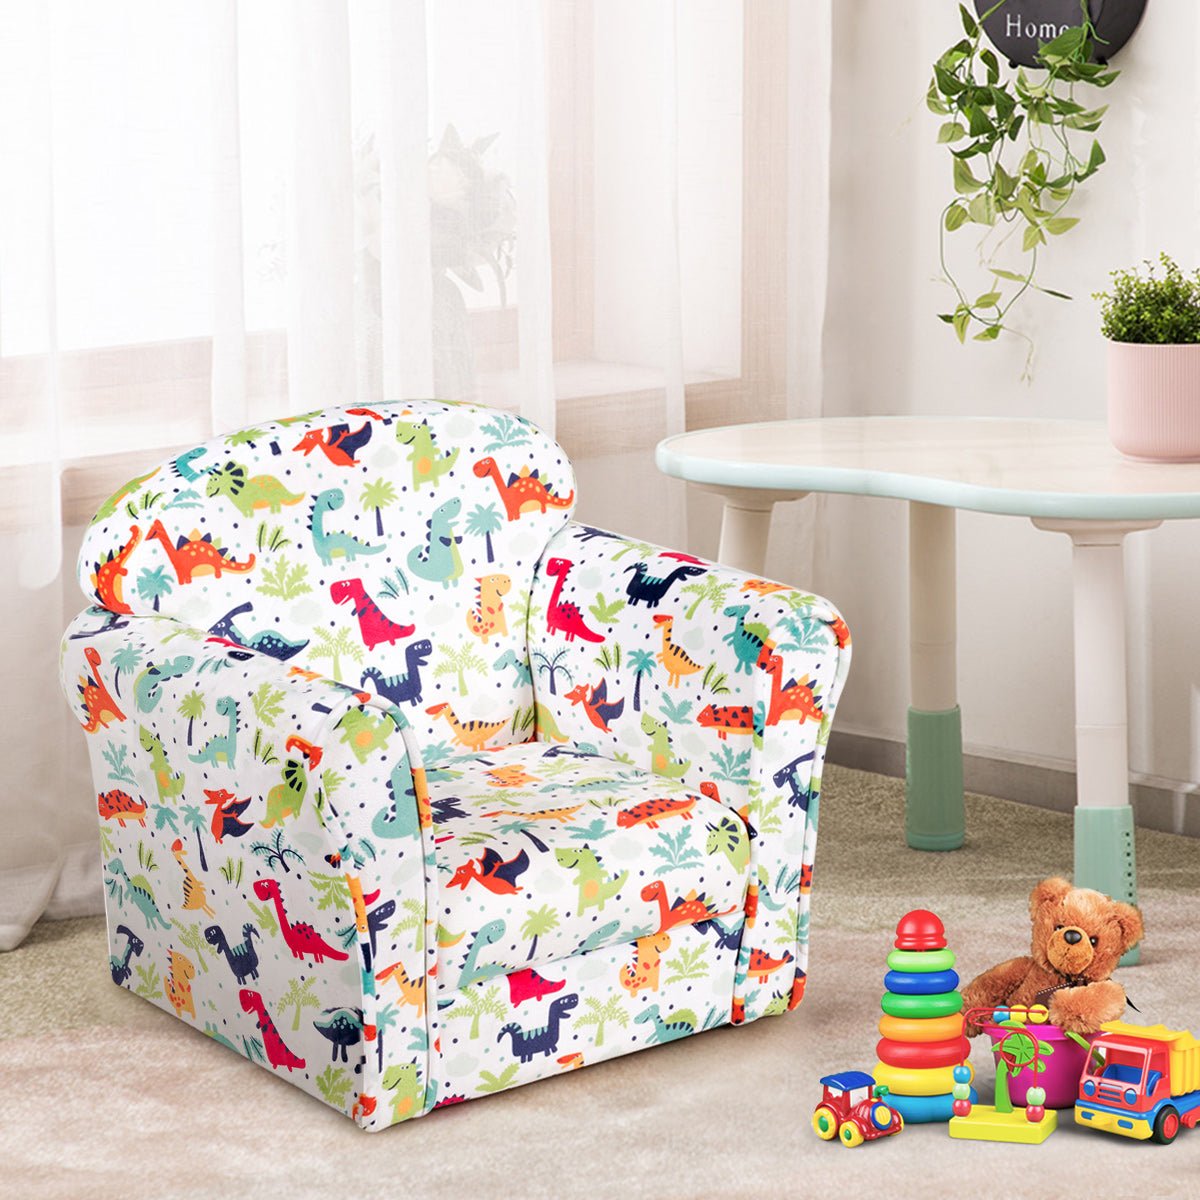 Velvet Kids Sofa with Charming Pattern: Cozy Addition to Baby Room